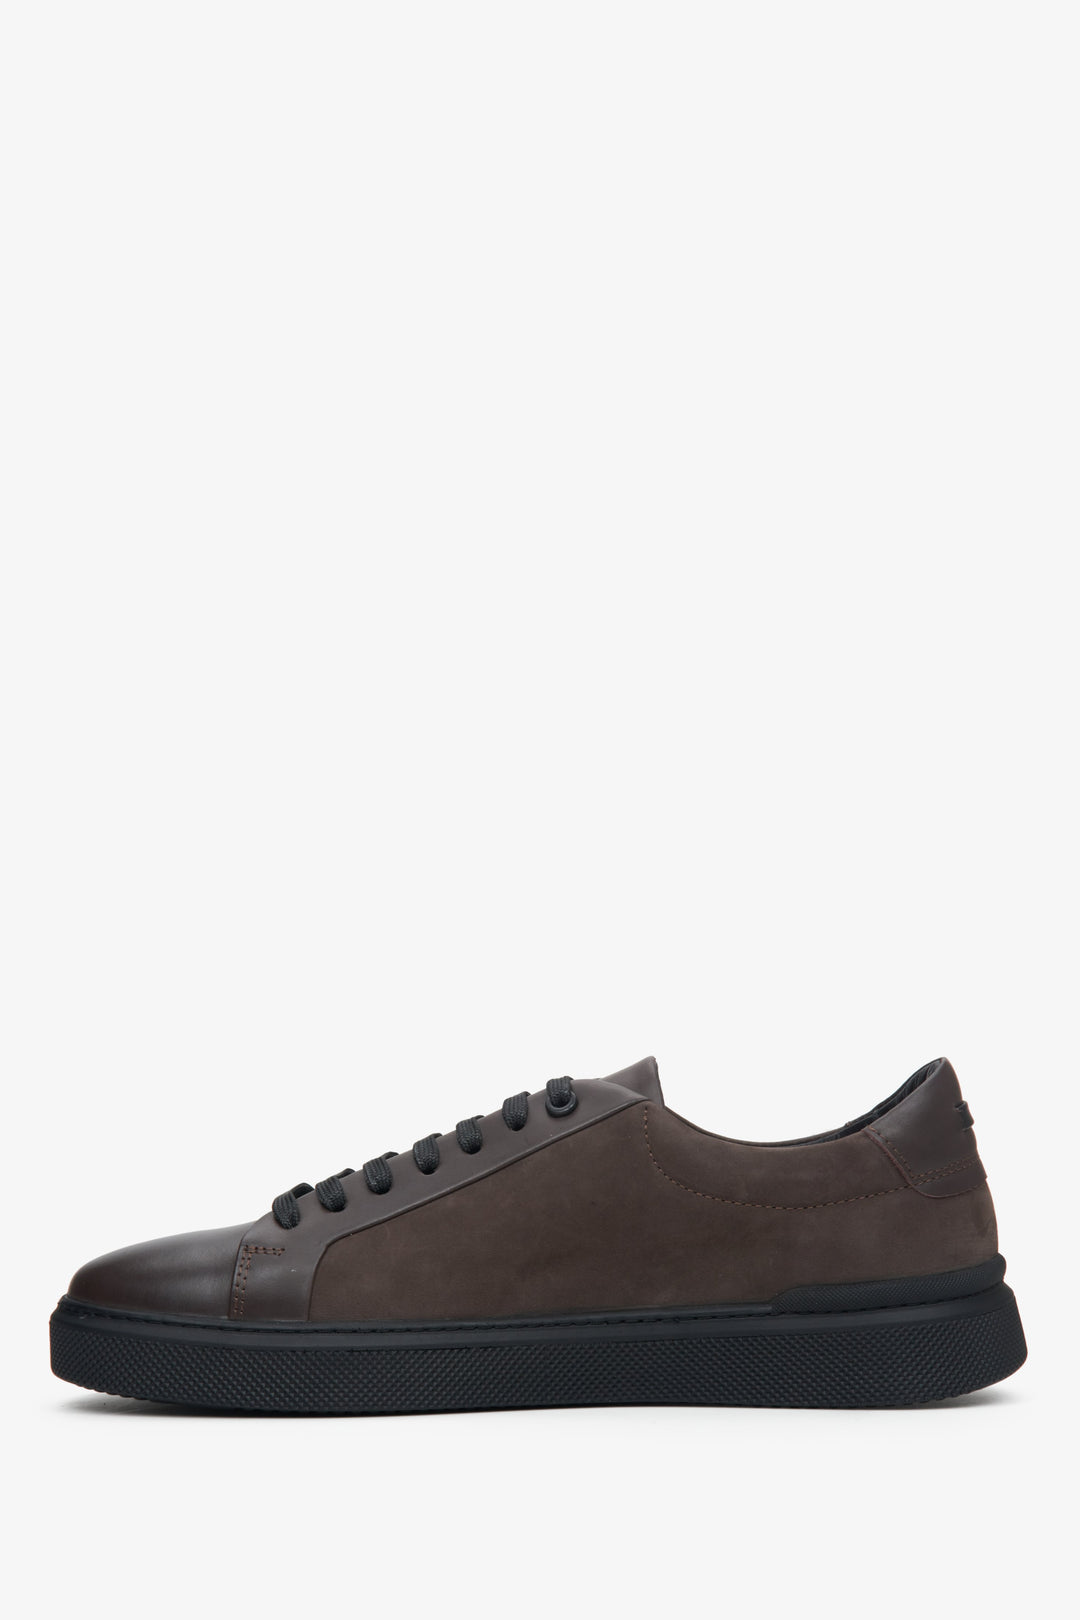 Brown velvet and leather men's sneakers by Estro - shoe profile.